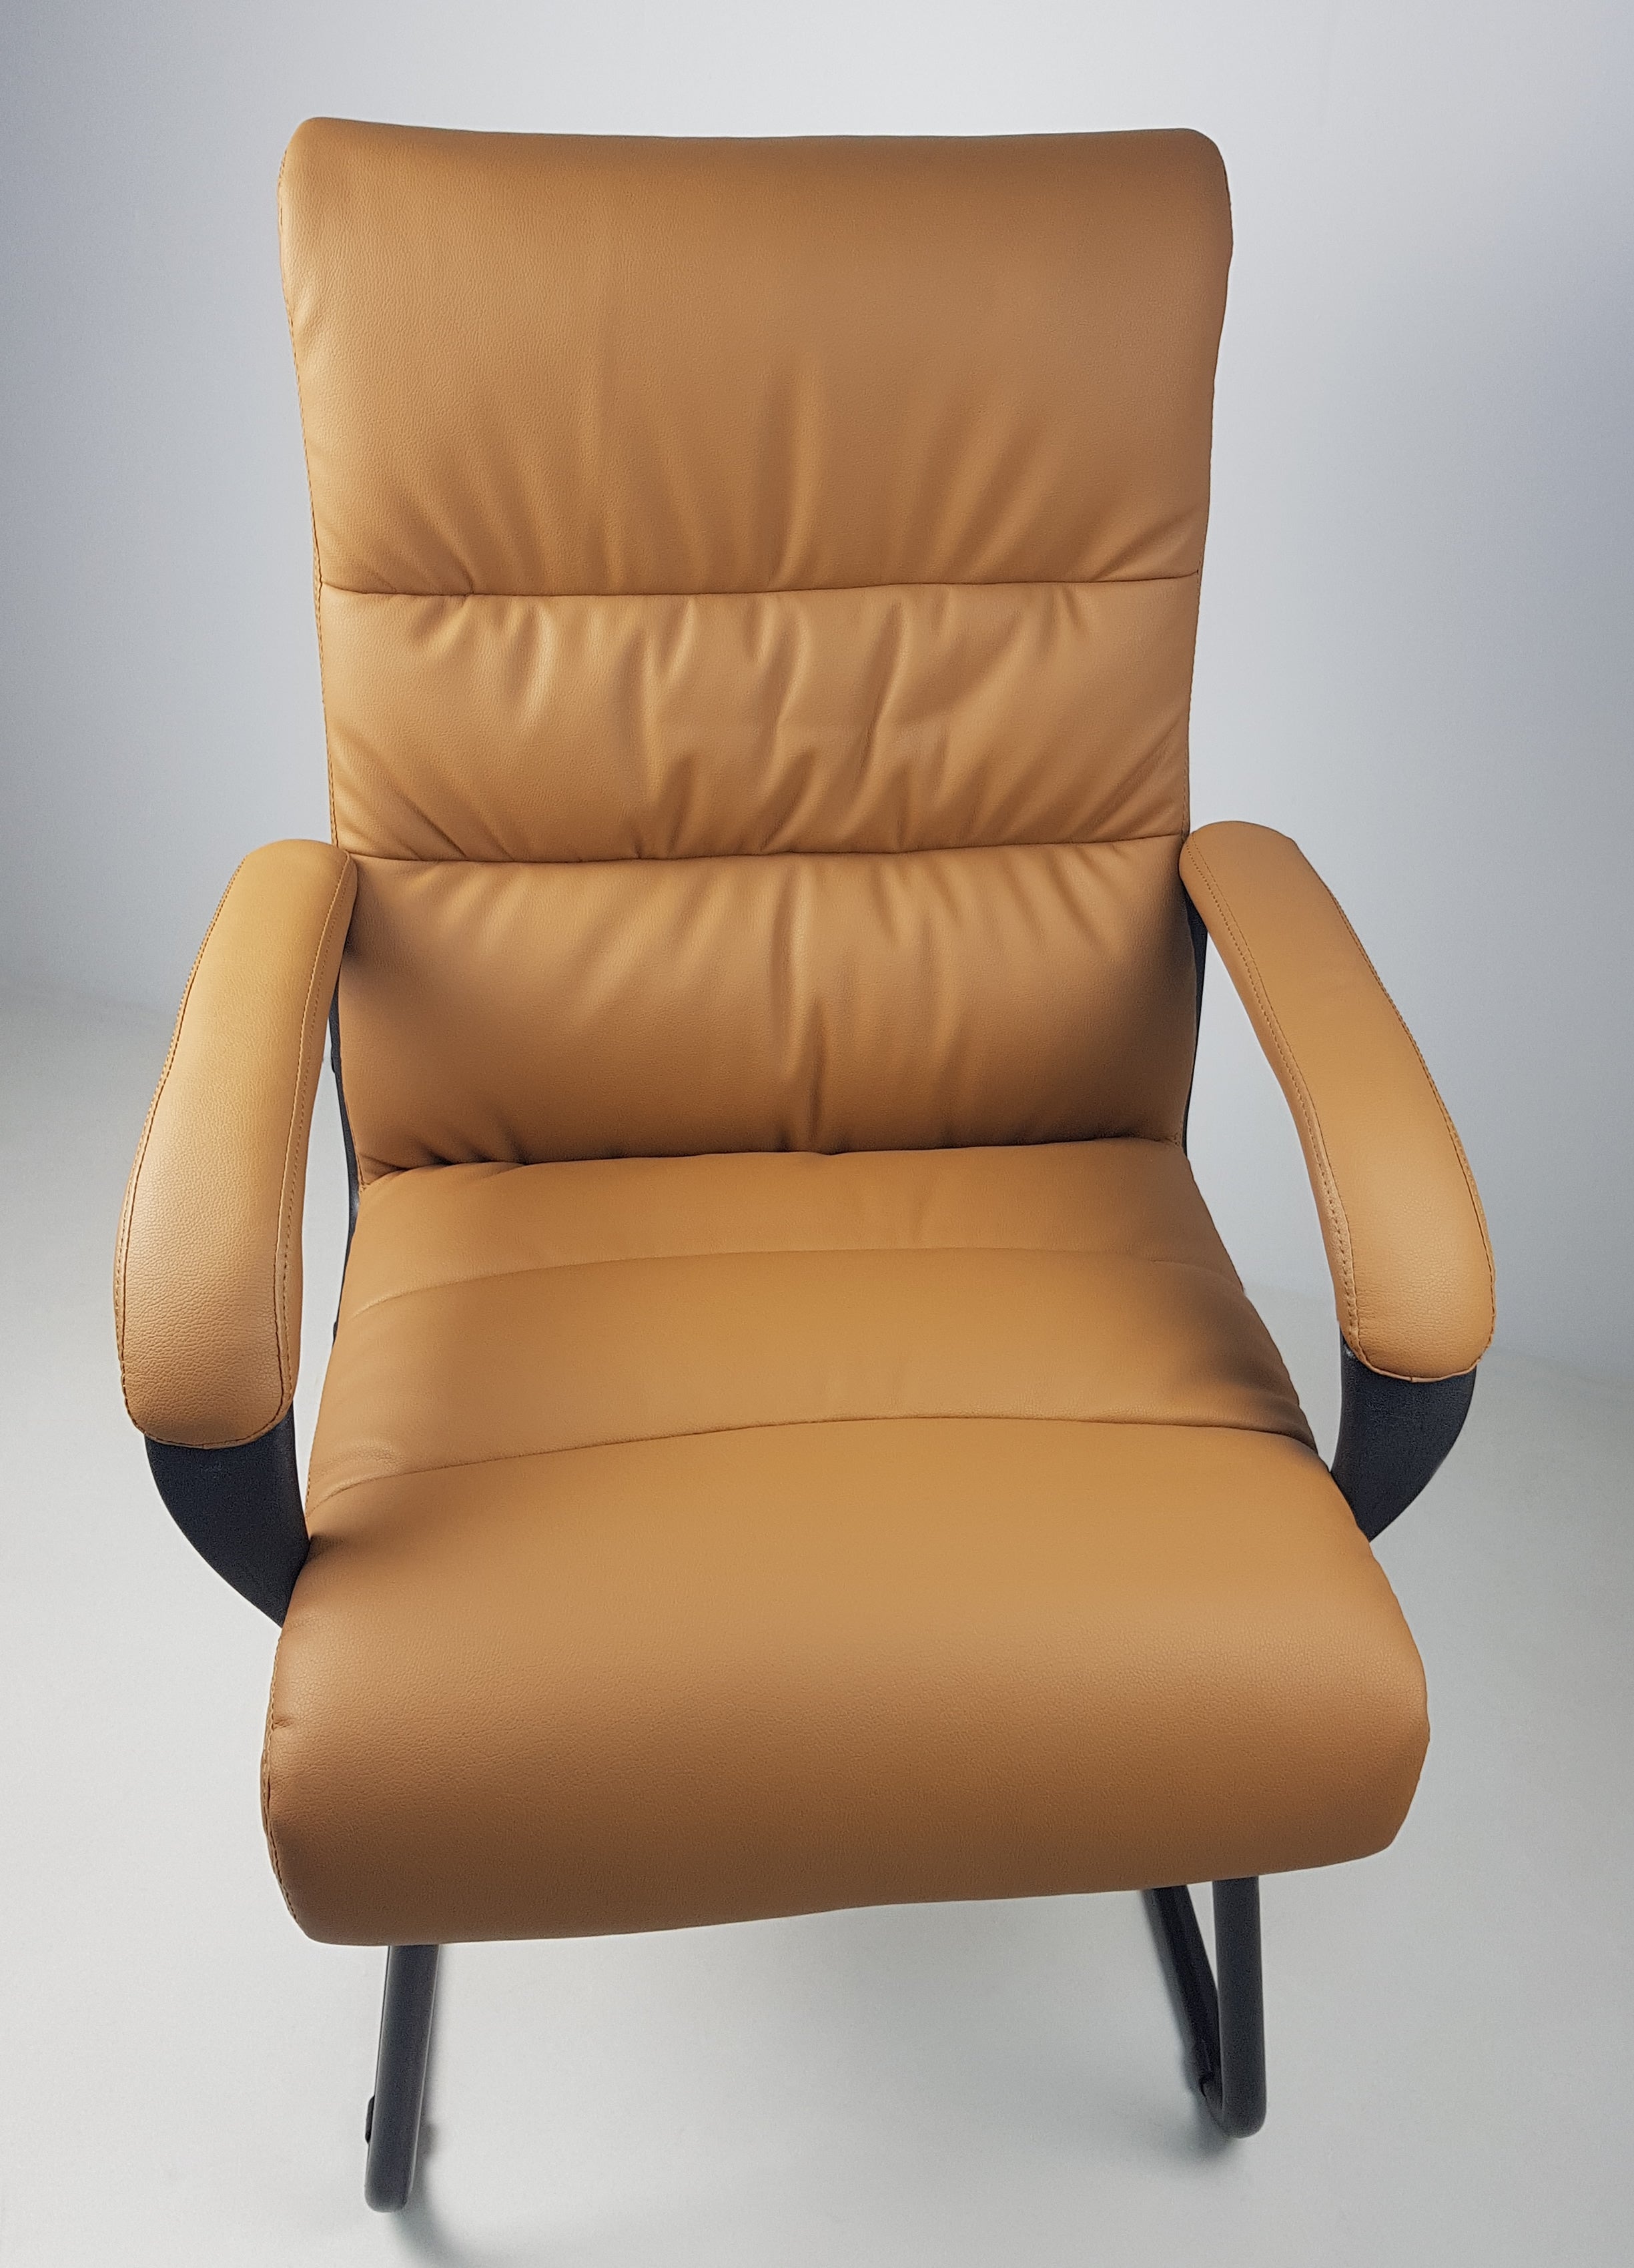 Soft Padded Visitor Office Chair in Beige - CHA-K35-2